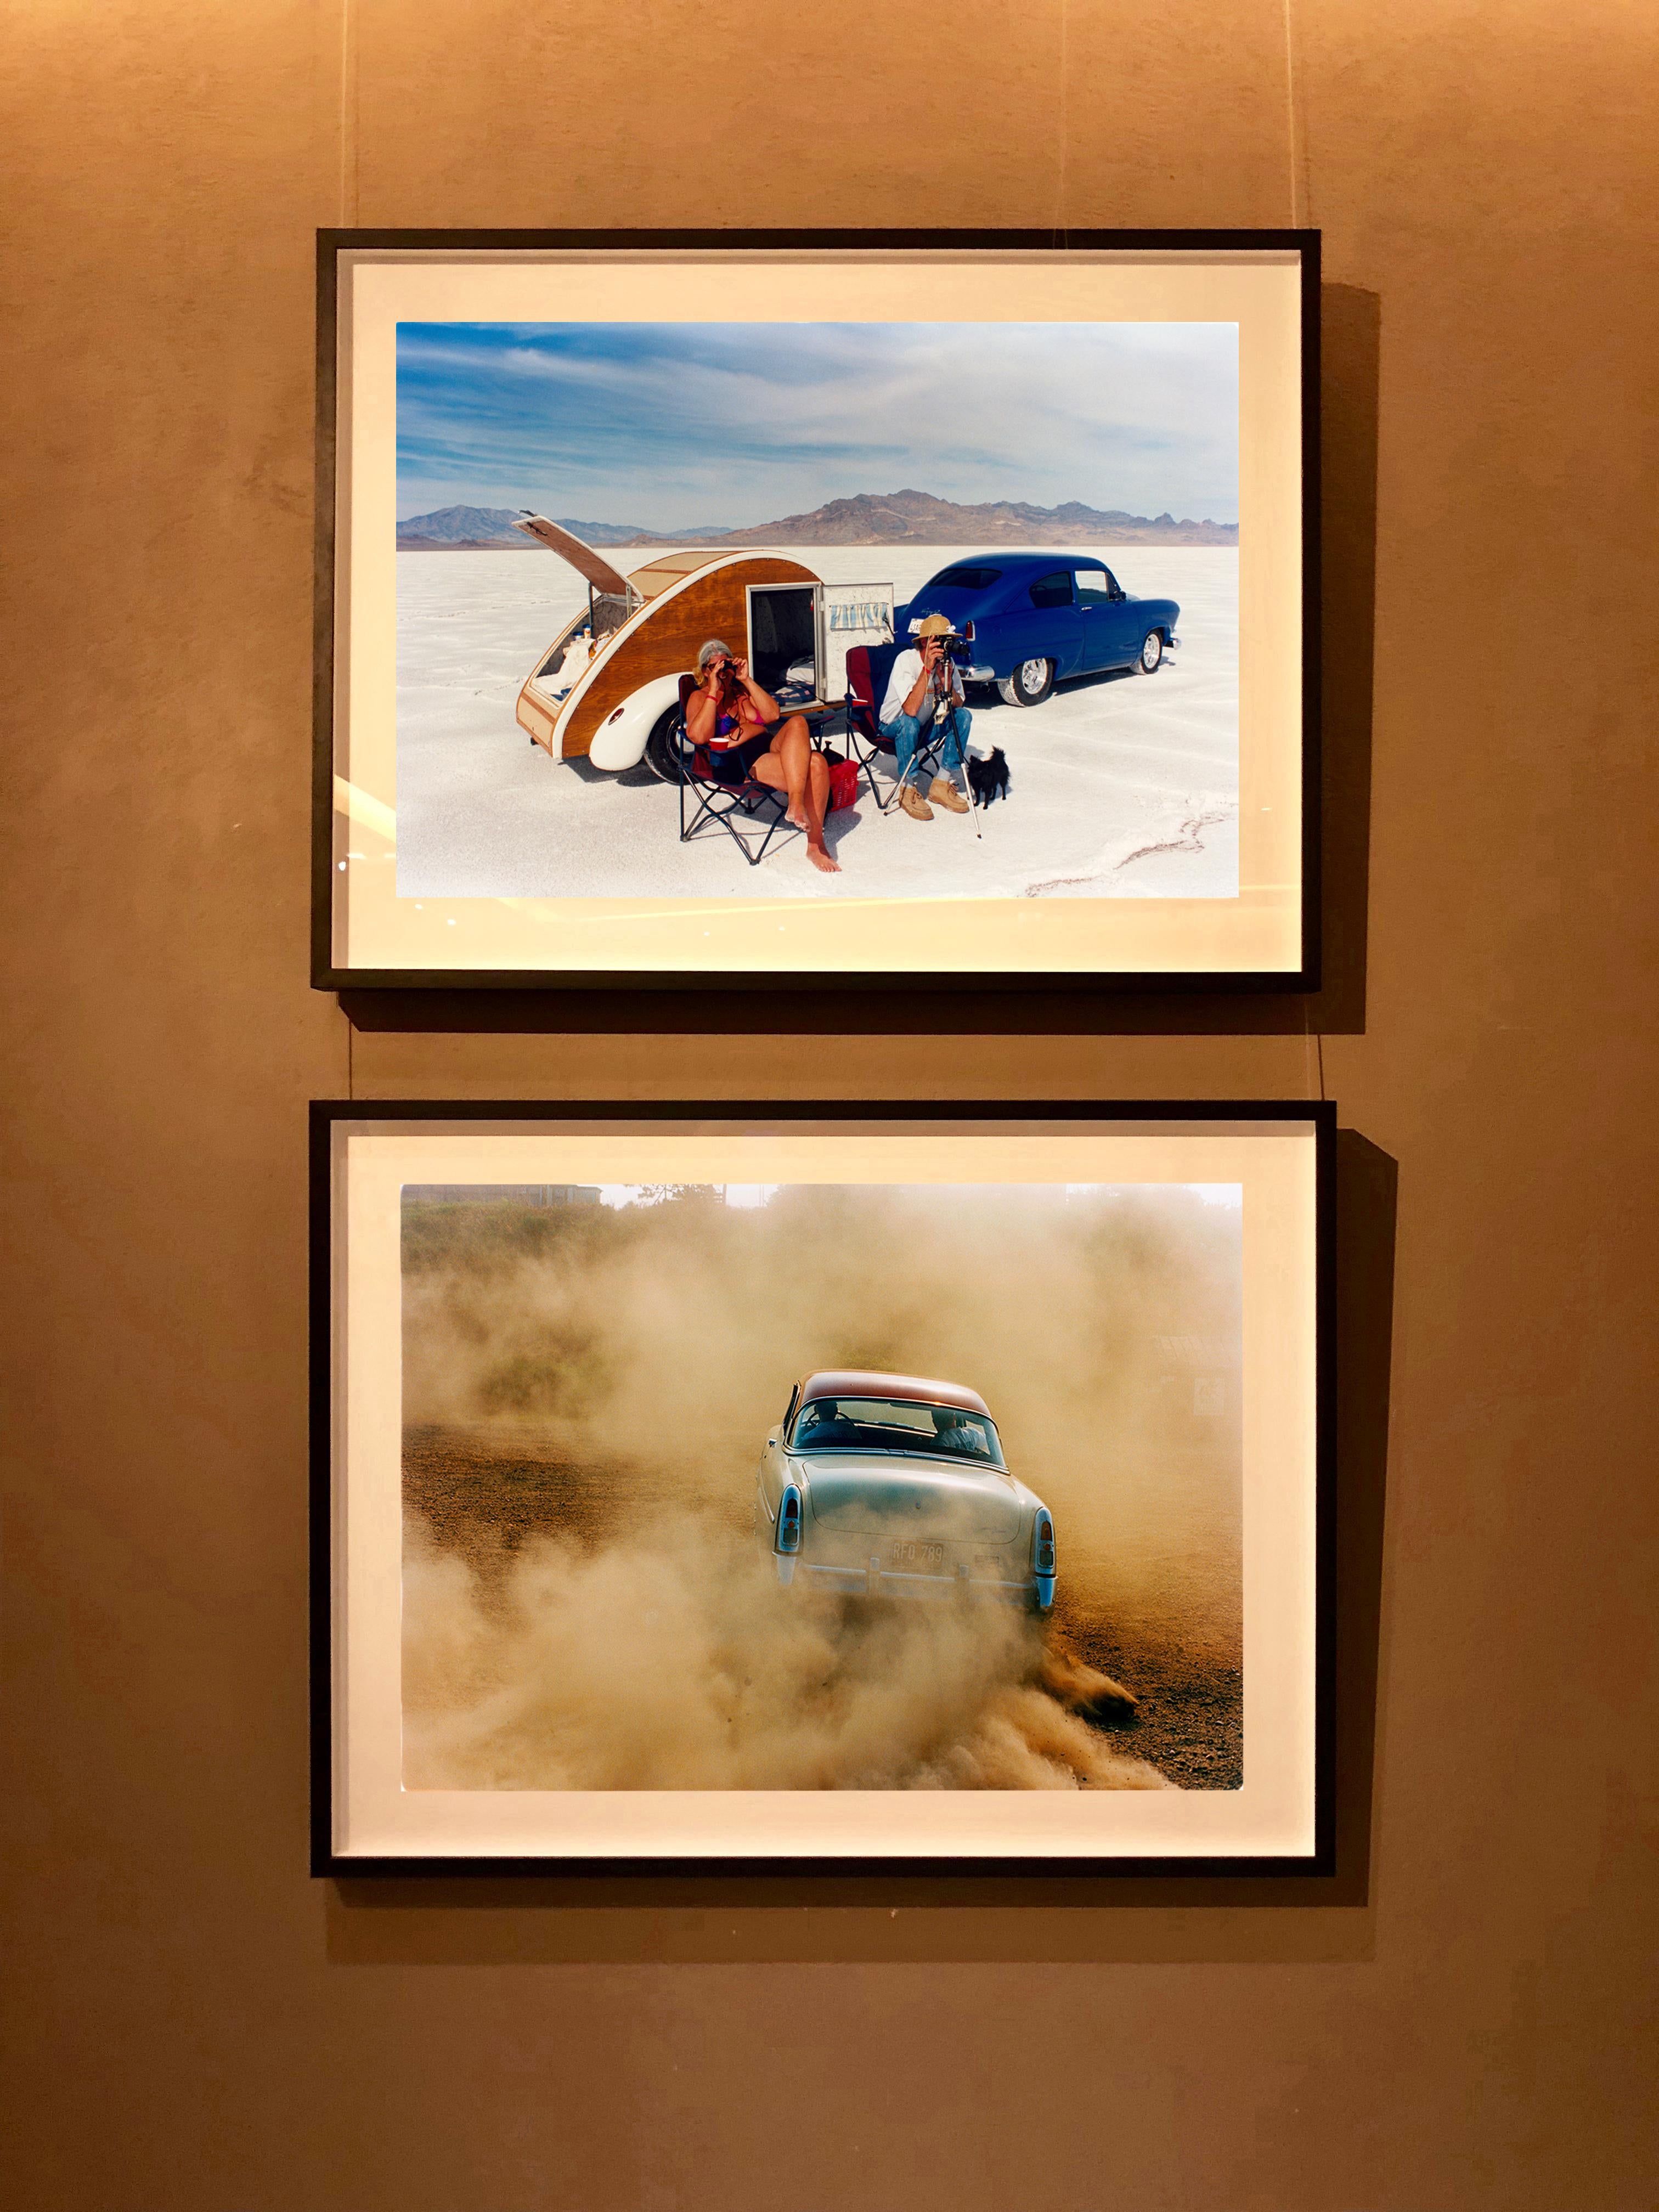 'Mercury in the Dust' shows a classic American car donut driving on a Norfolk beach in the East of England. This photograph was captured at Hemsby Rock and Roll weekend, and is part of Richard Heeps' Man's Ruin' series.

This artwork is a limited